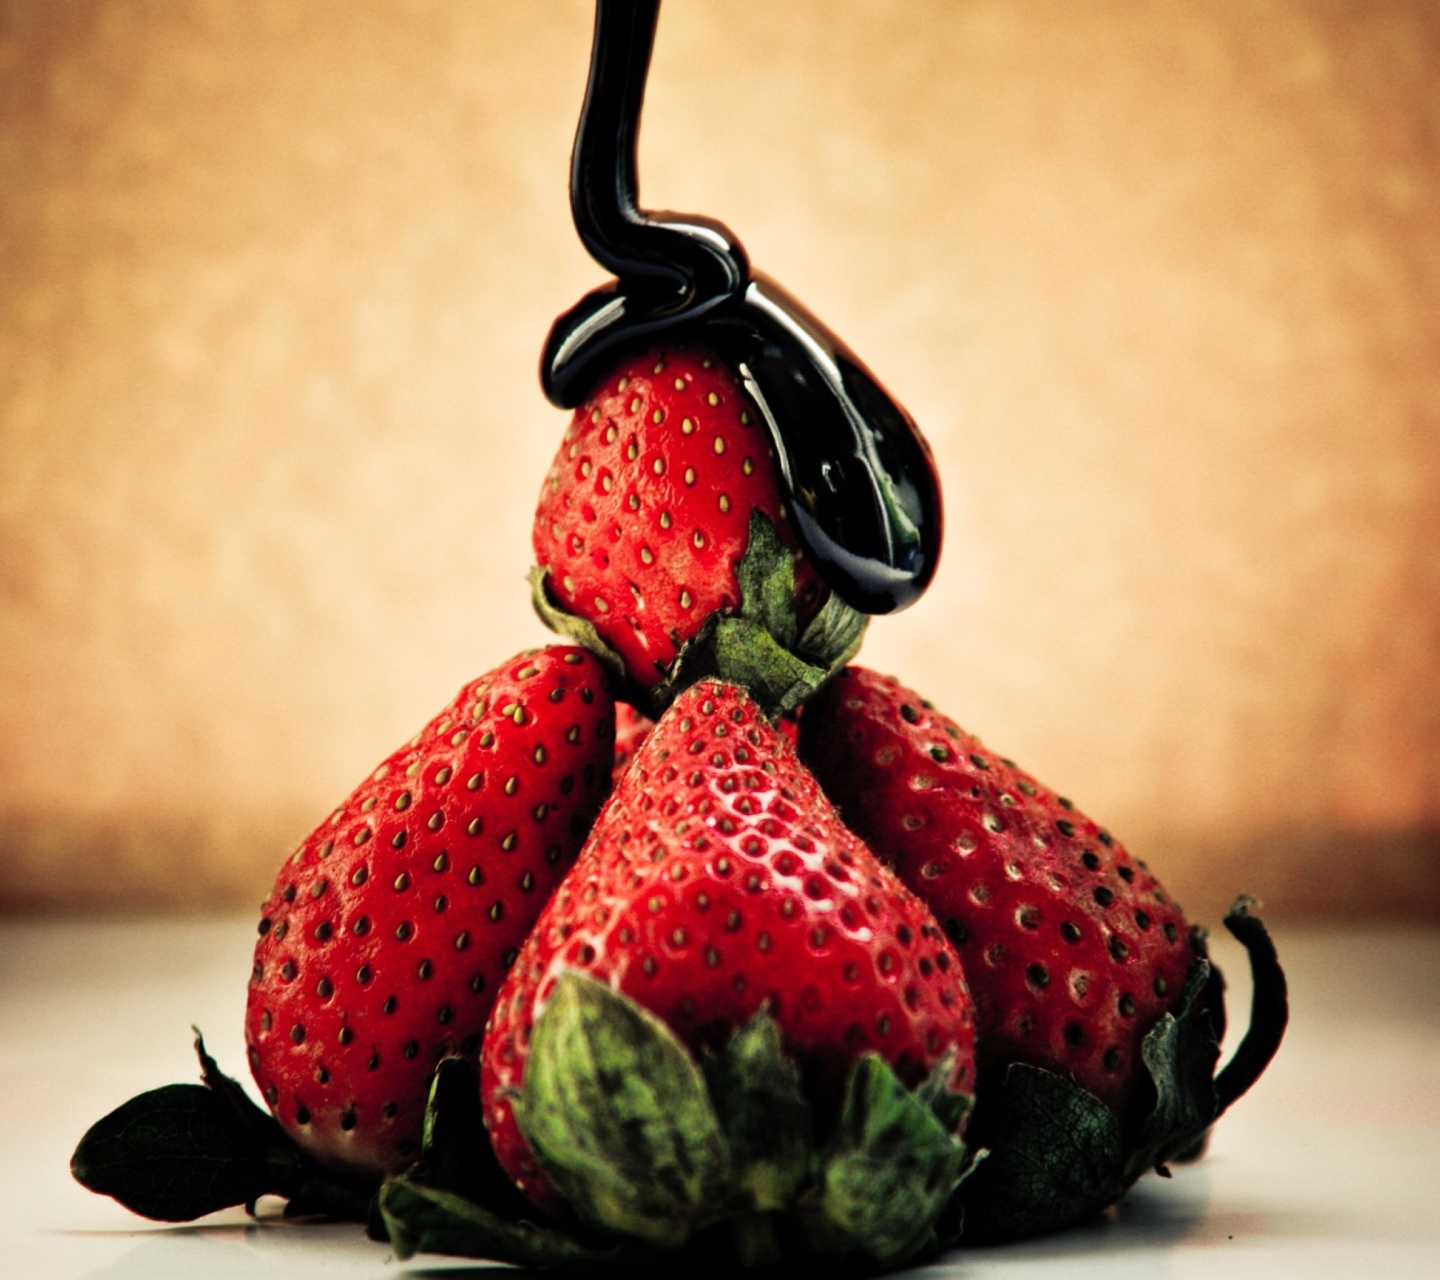 Strawberries with chocolate wallpaper 1440x1280